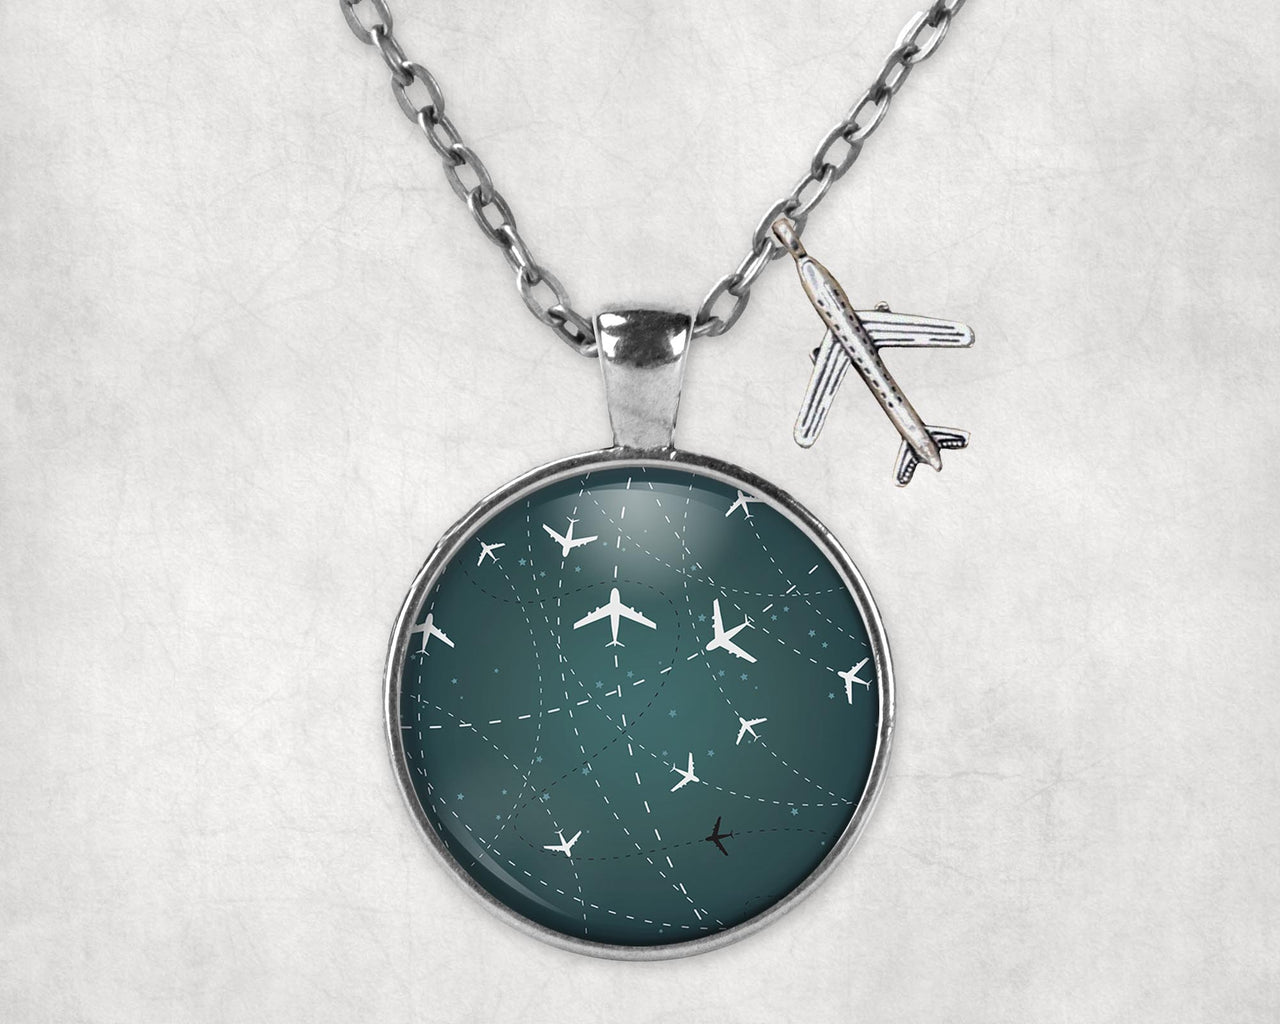 Travelling with Aircraft Designed Necklaces